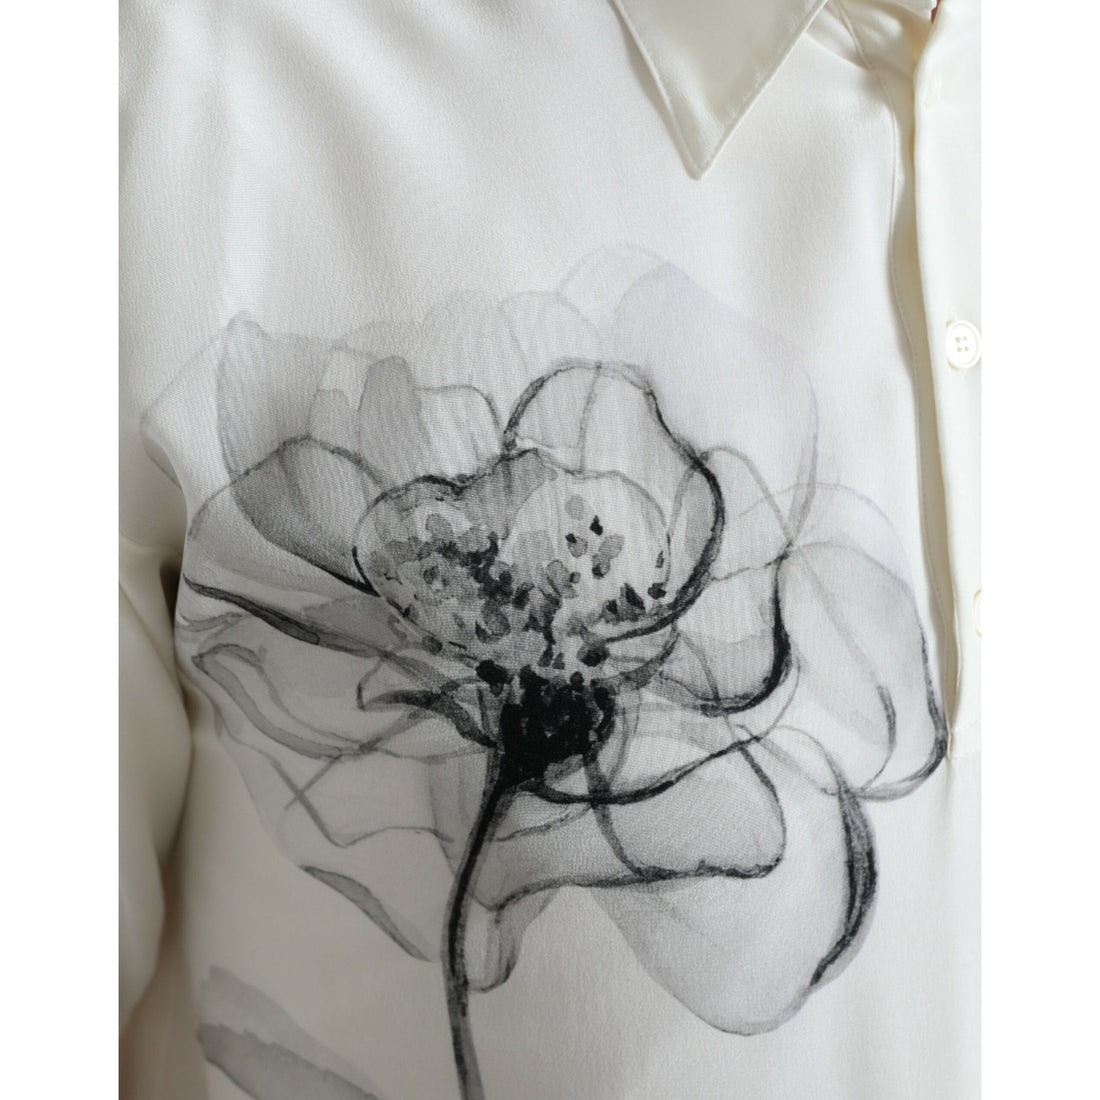 Dolce & Gabbana Off White Floral Print Collared Polo T-shirt